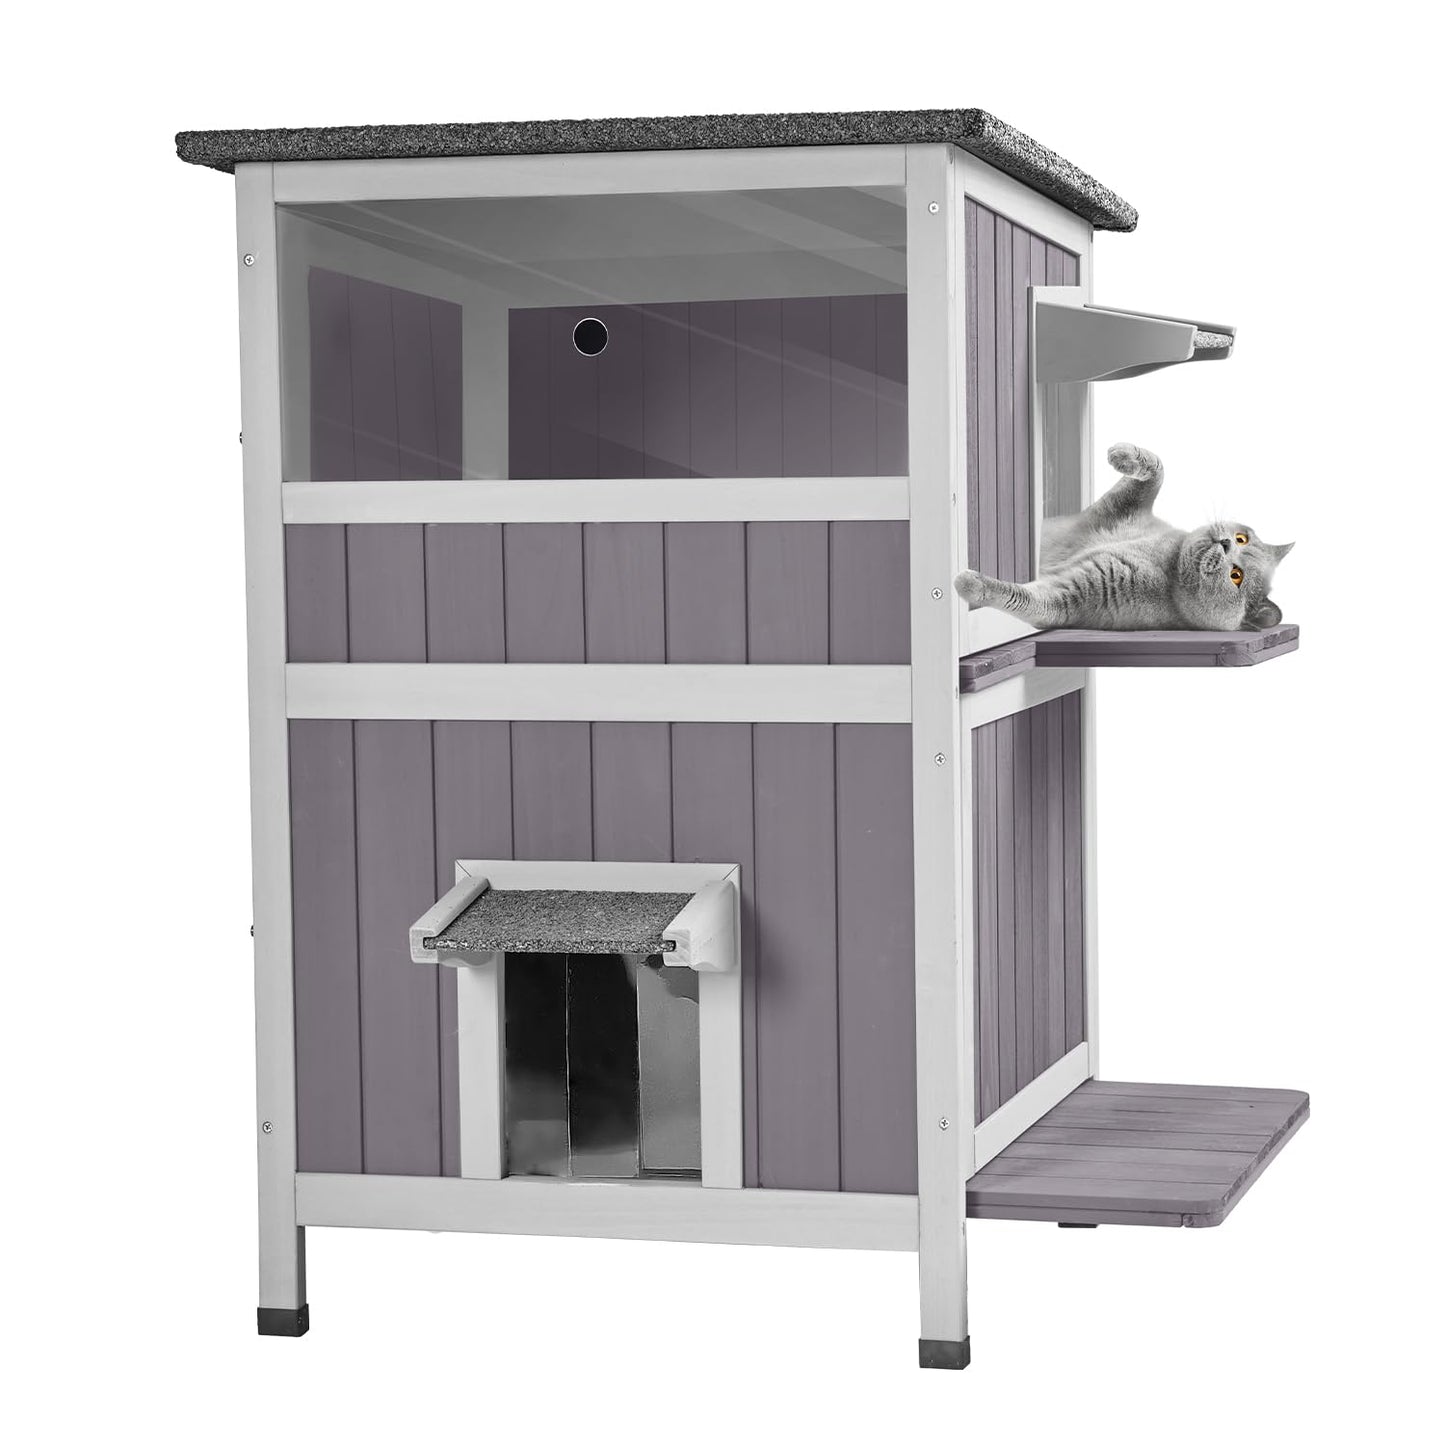 Feral Cat House Outdoor Waterproof Kitty Shelter for Winter,Cat Cage Perfect for Outdoor and Inddor Use,2-Story…